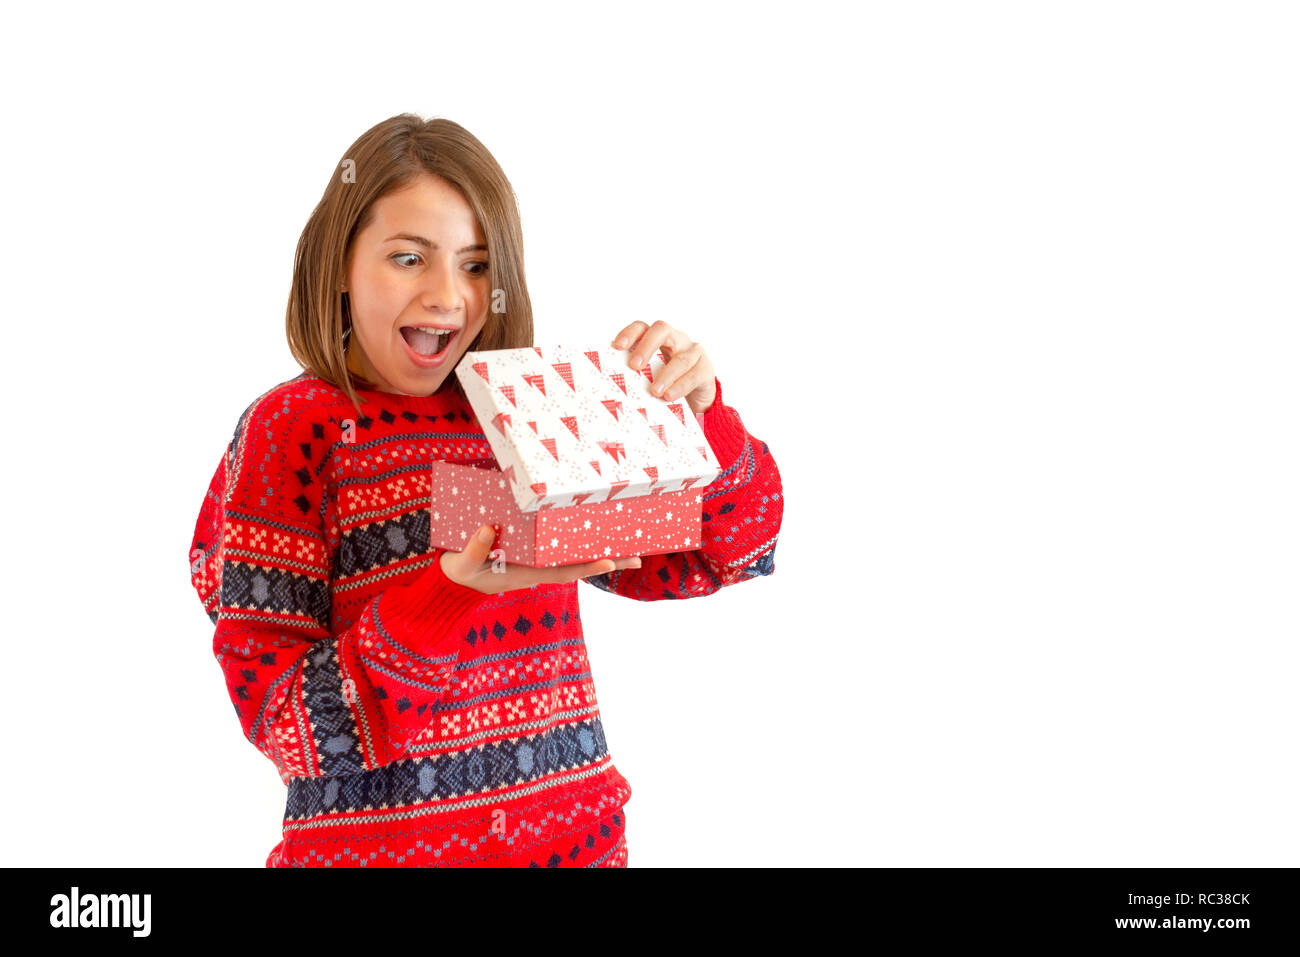 Portrait of a happy cute woman holding gift box isolated on a white background Stock Photo